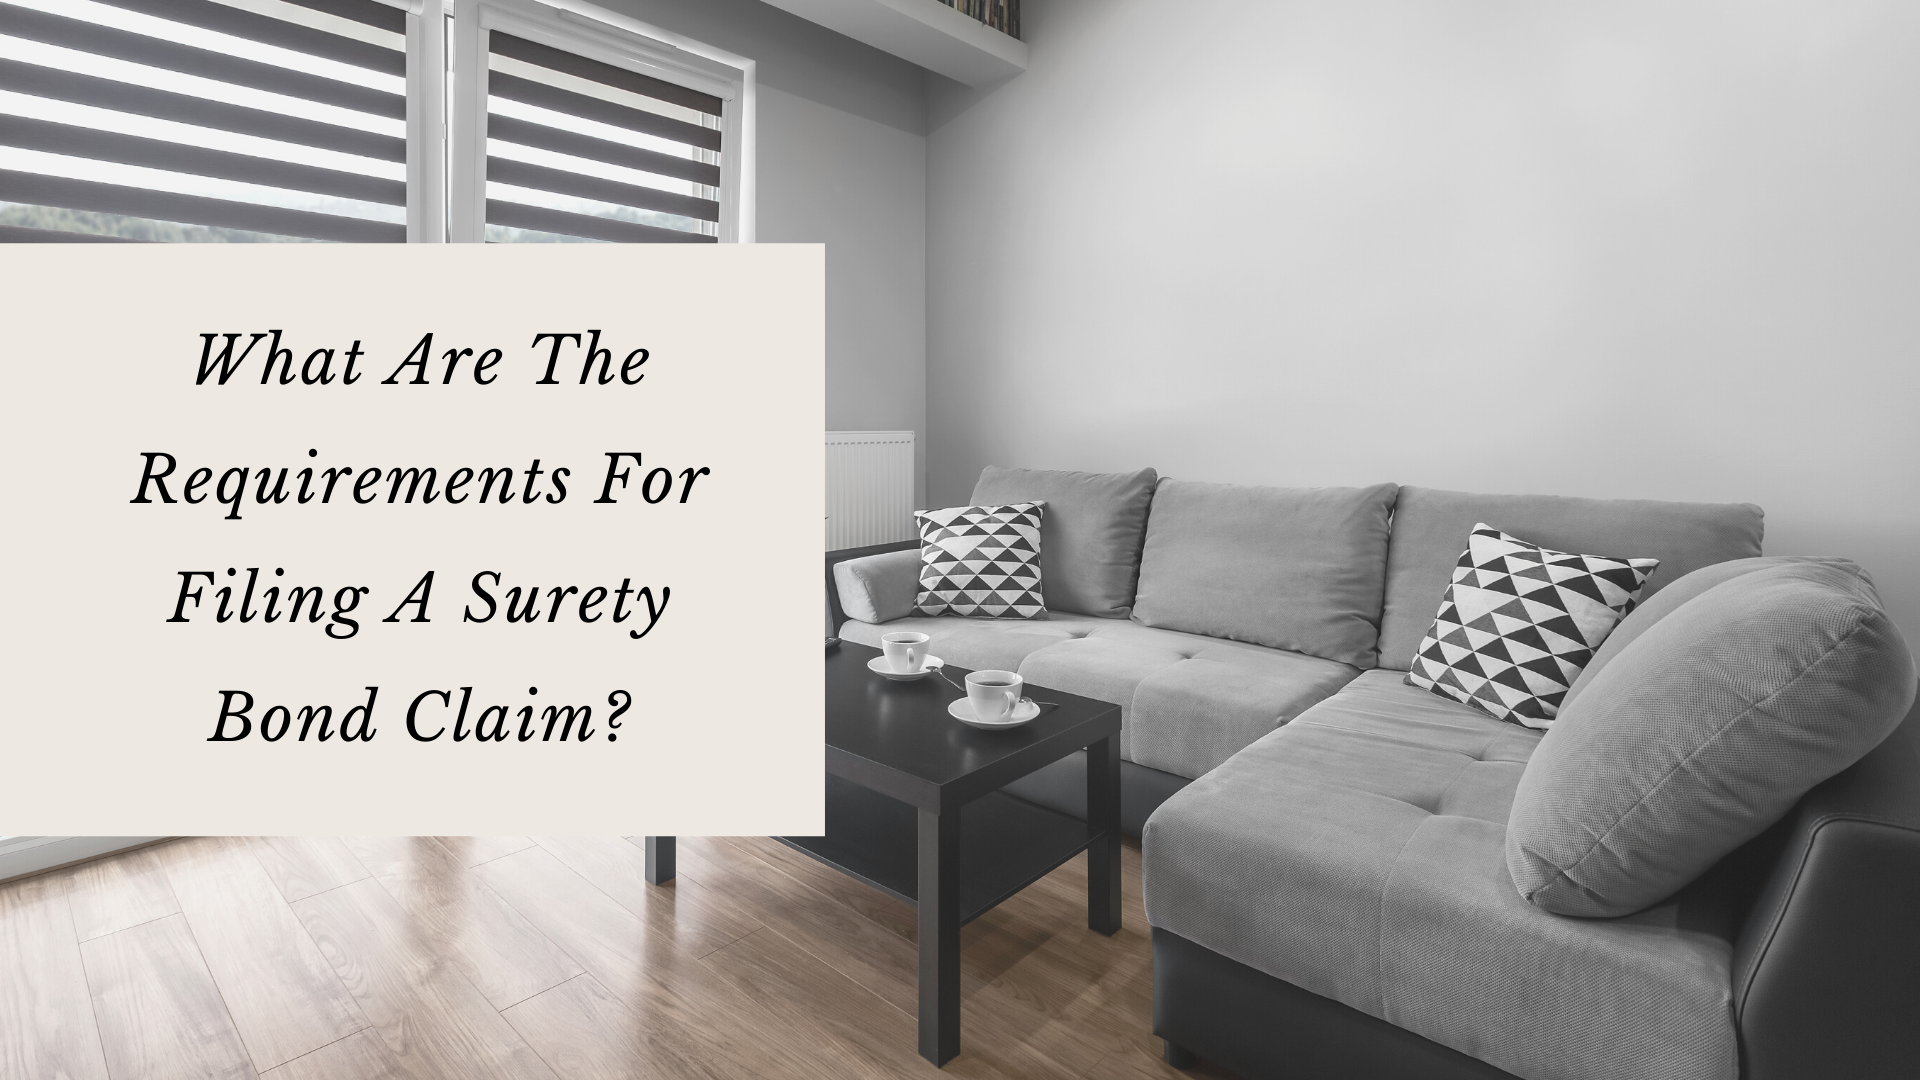 surety bond - What are the requirements for filing a surety bond claim - grey living room